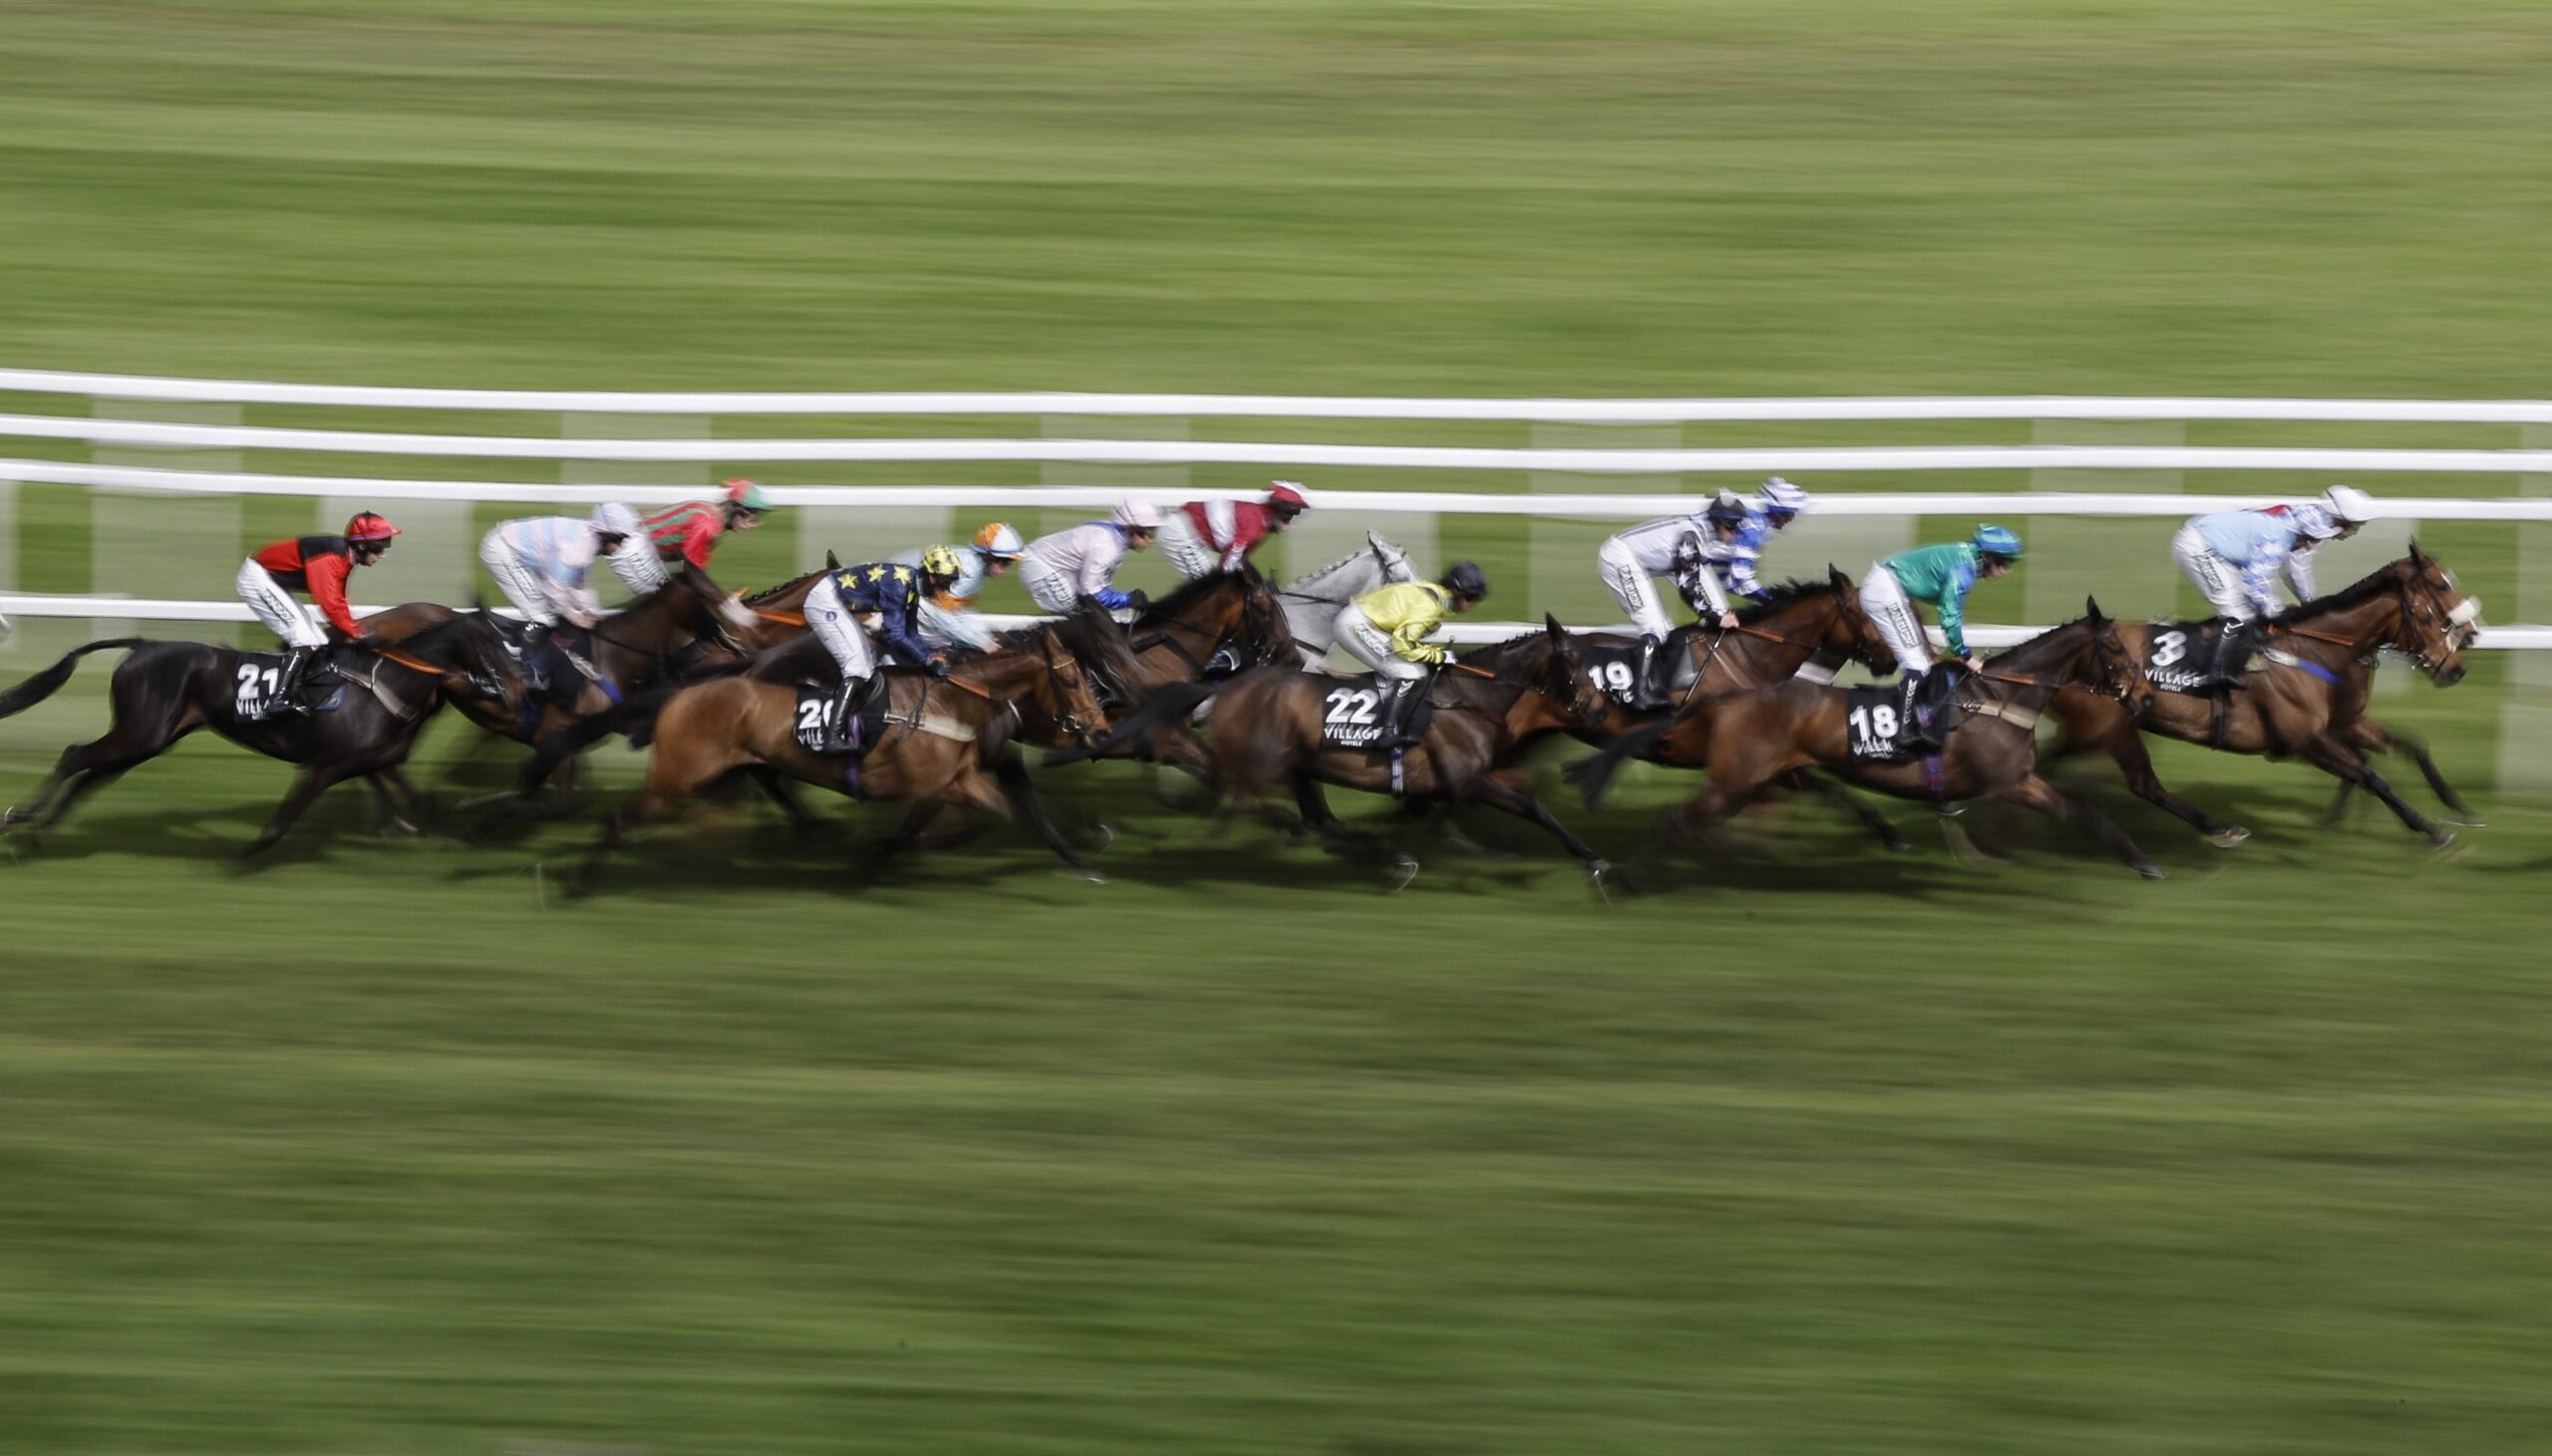 Runners in the second race, the Village Hotels Handicap Hurdle, during racing on day three of the Grand National